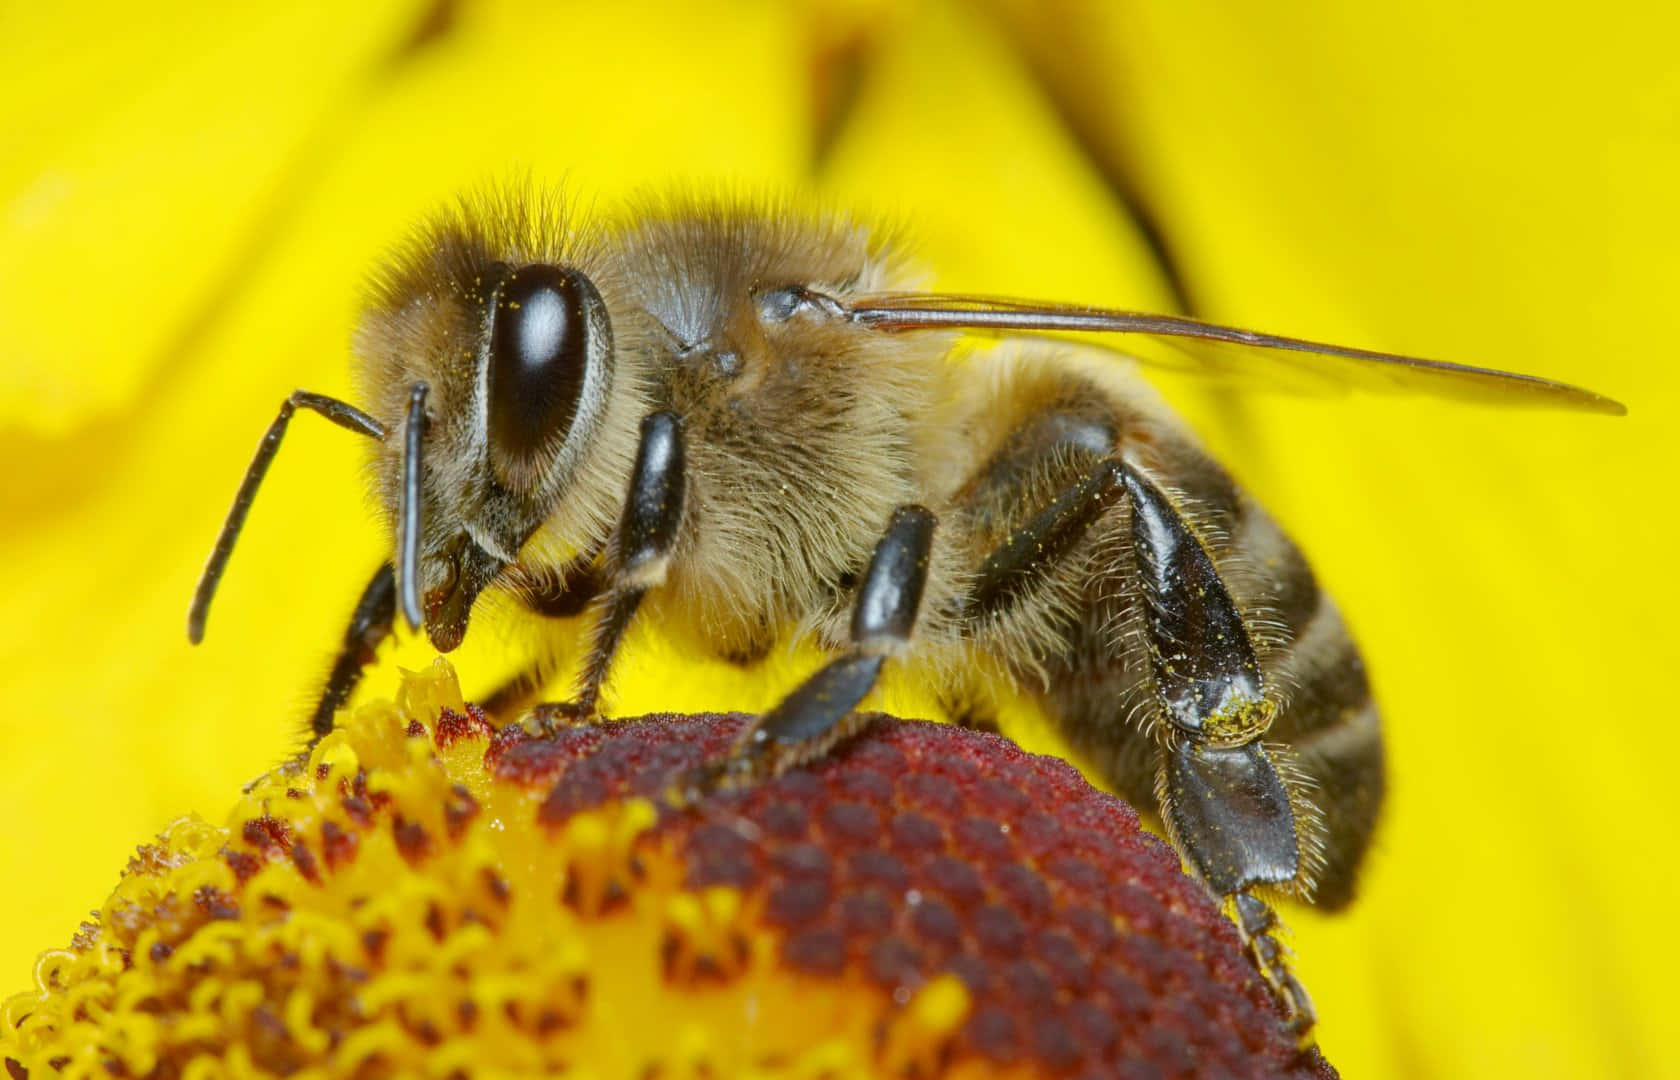 A close-up of a honey bee drinking nectar from a flower